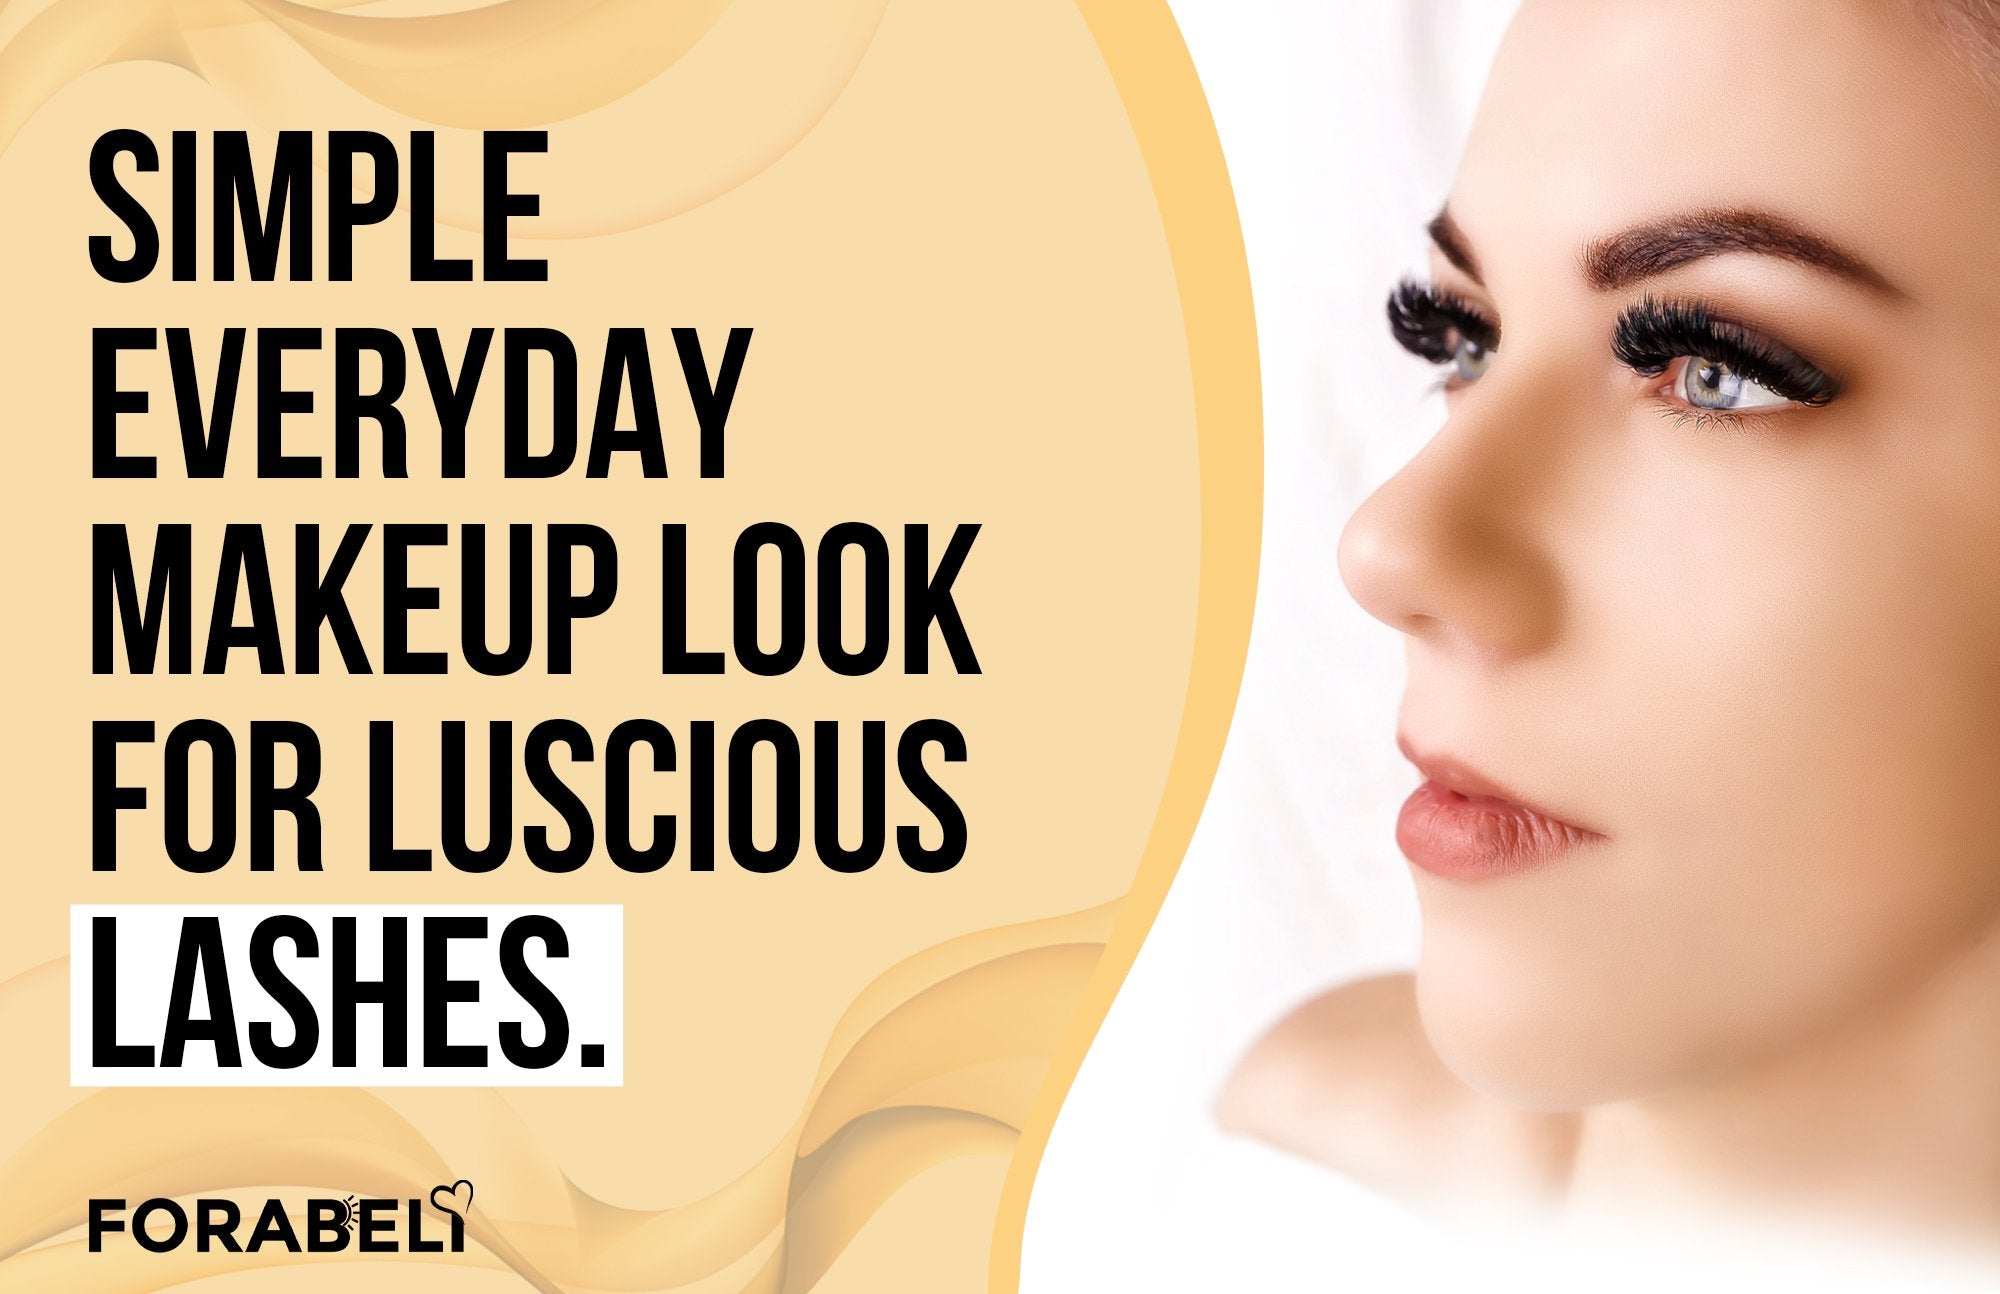 How to Do a Simple Everyday Makeup Look